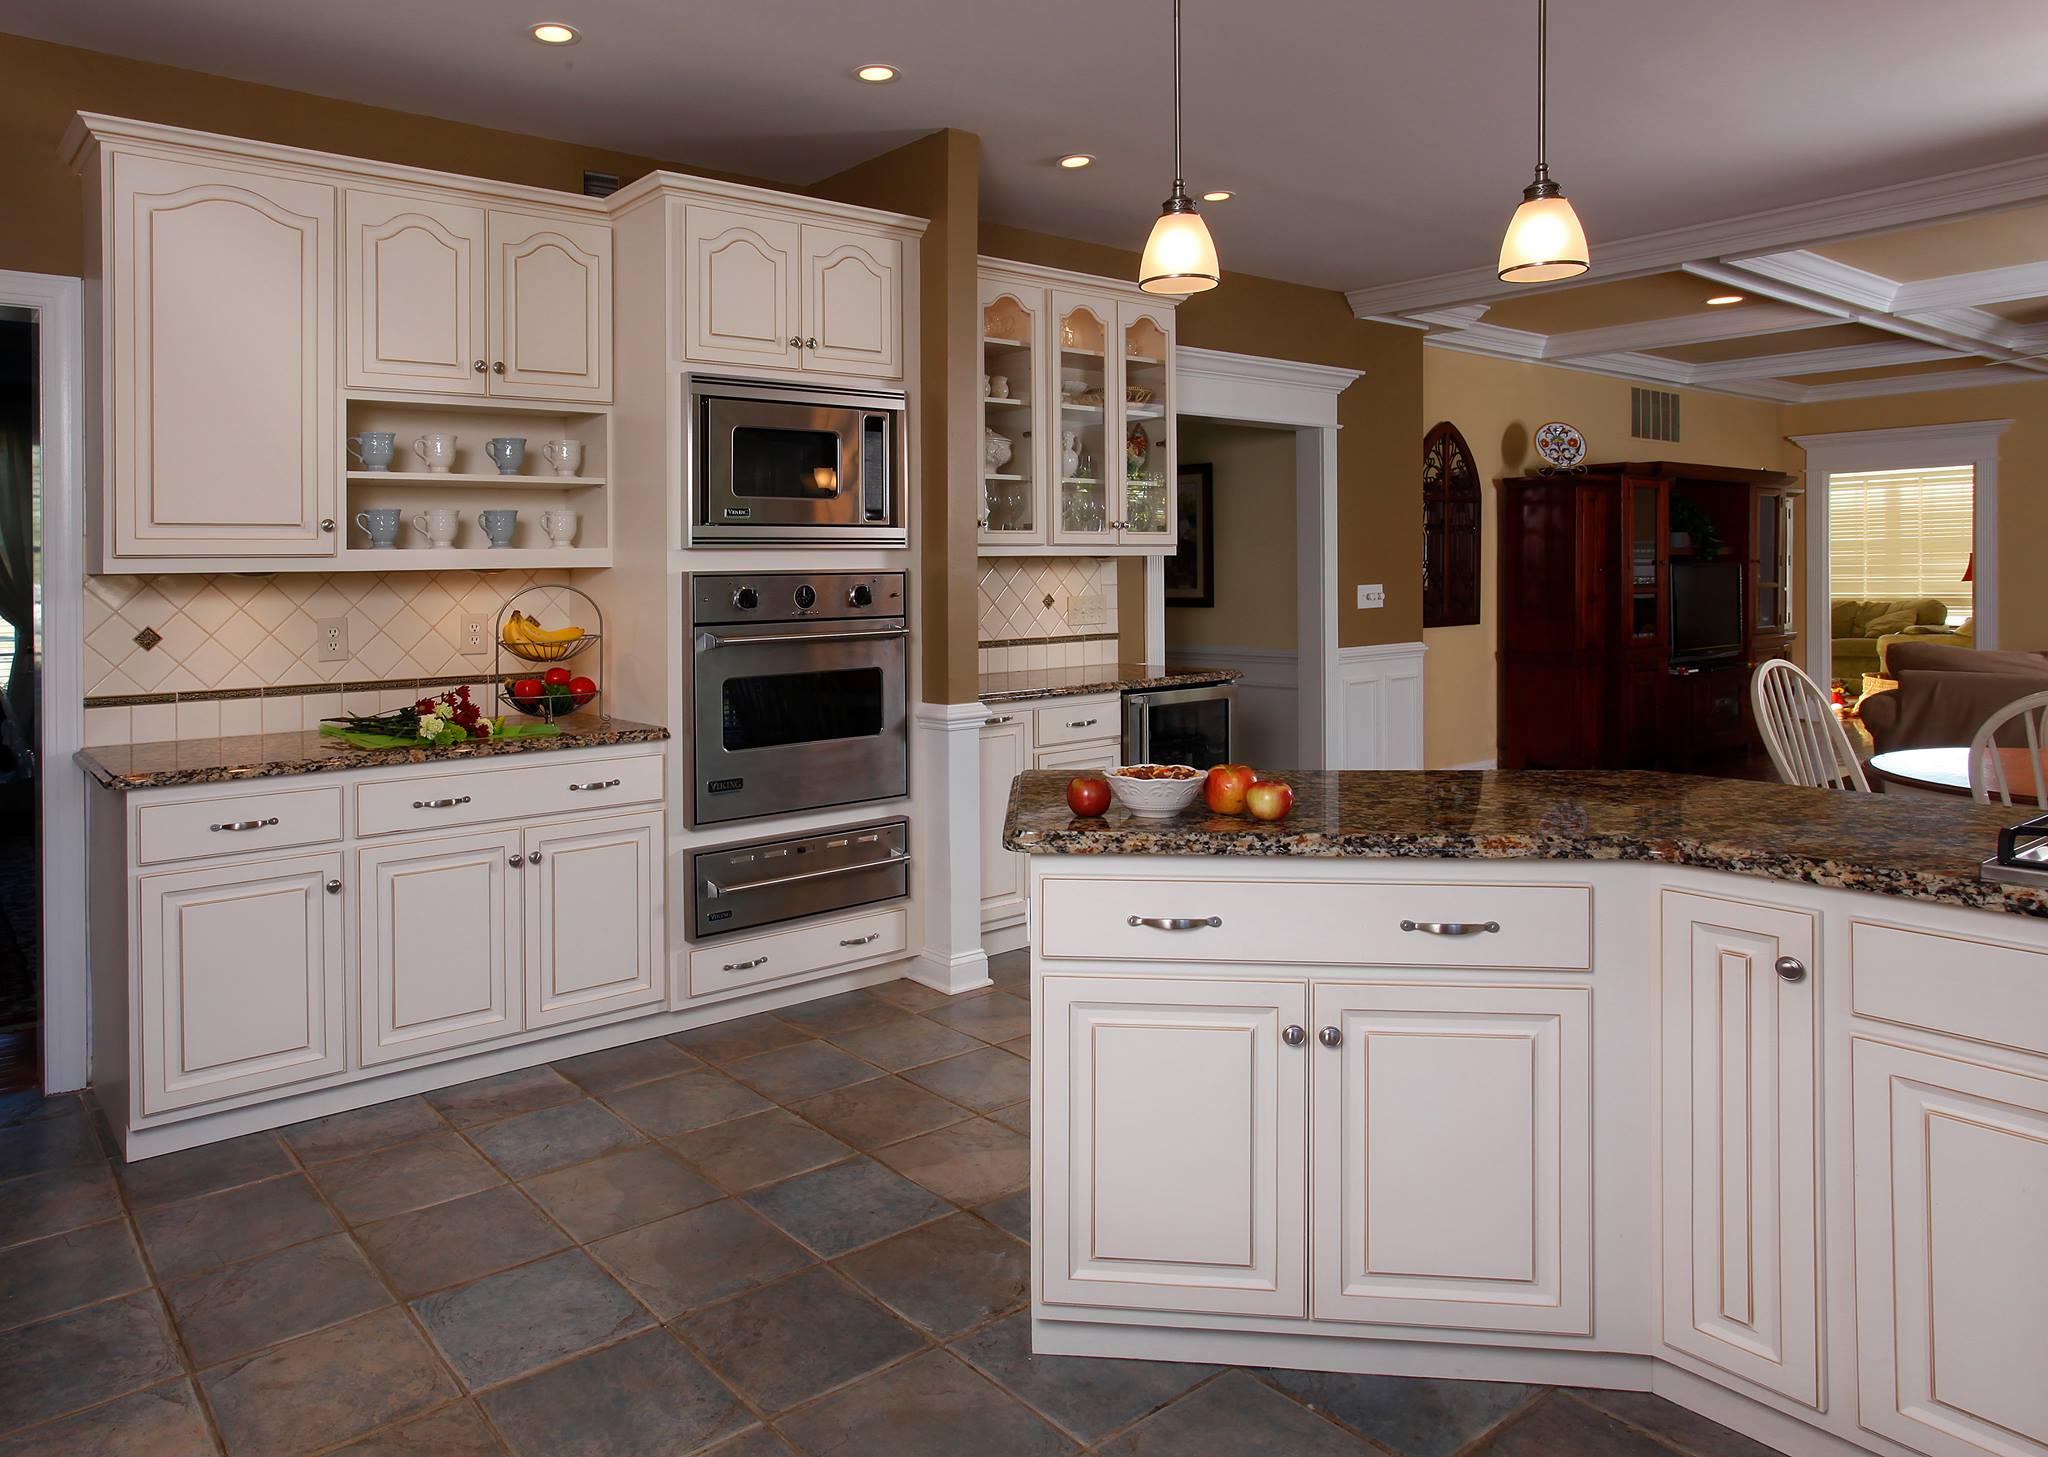 New White Kitchen Cabinets Pics for Small Space